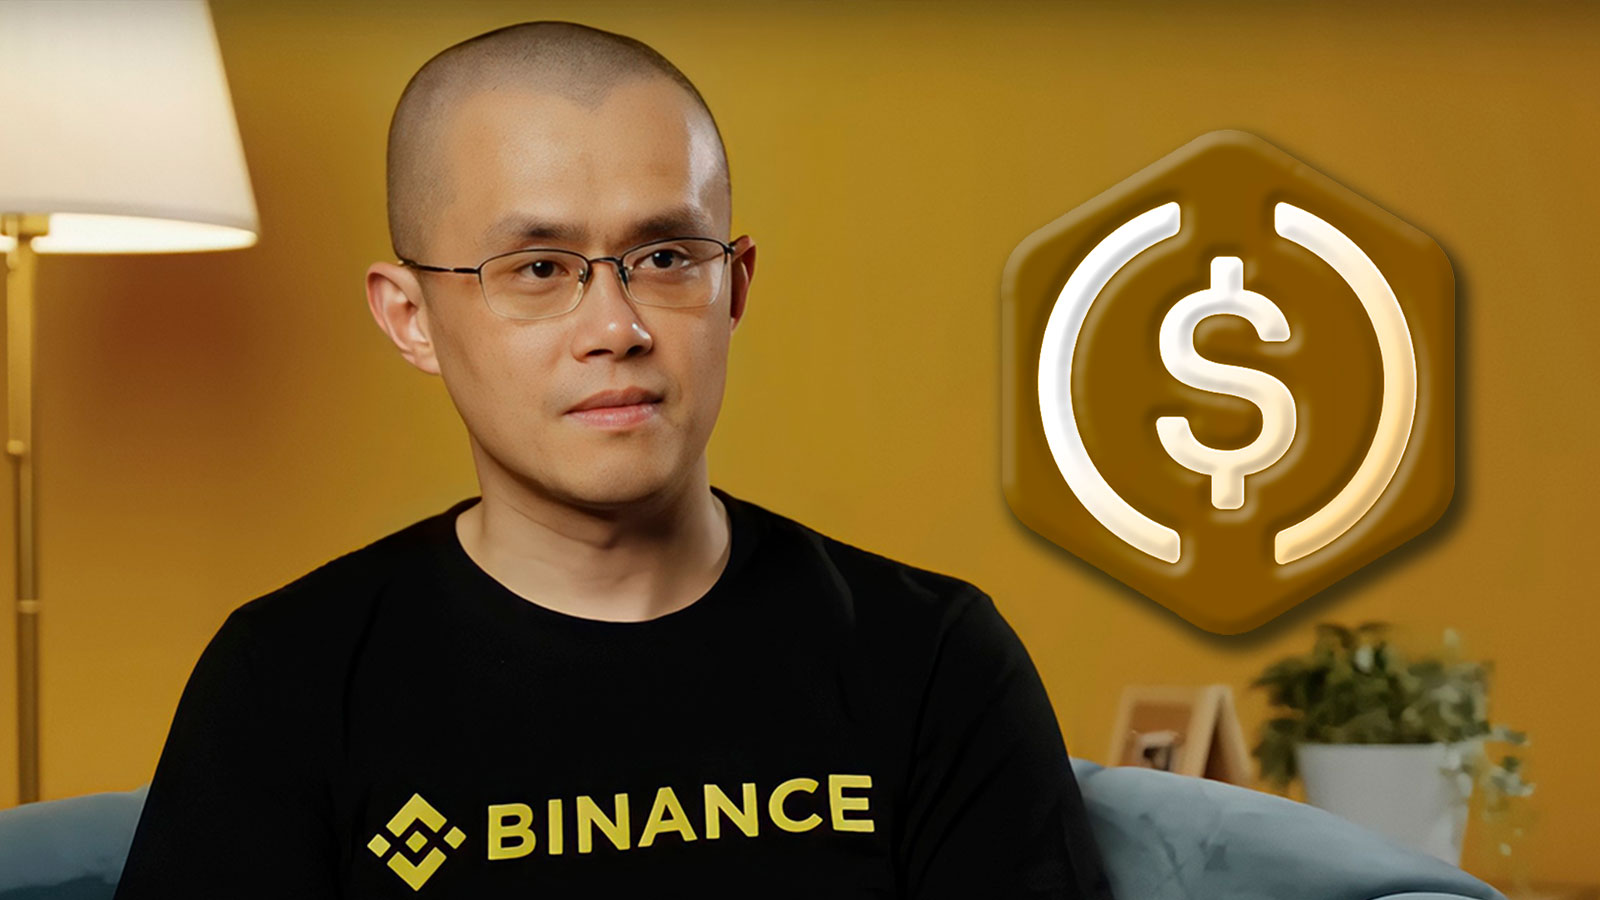 Binance CEO Explains Why Stablecoin Dominance Is Bullish for Crypto